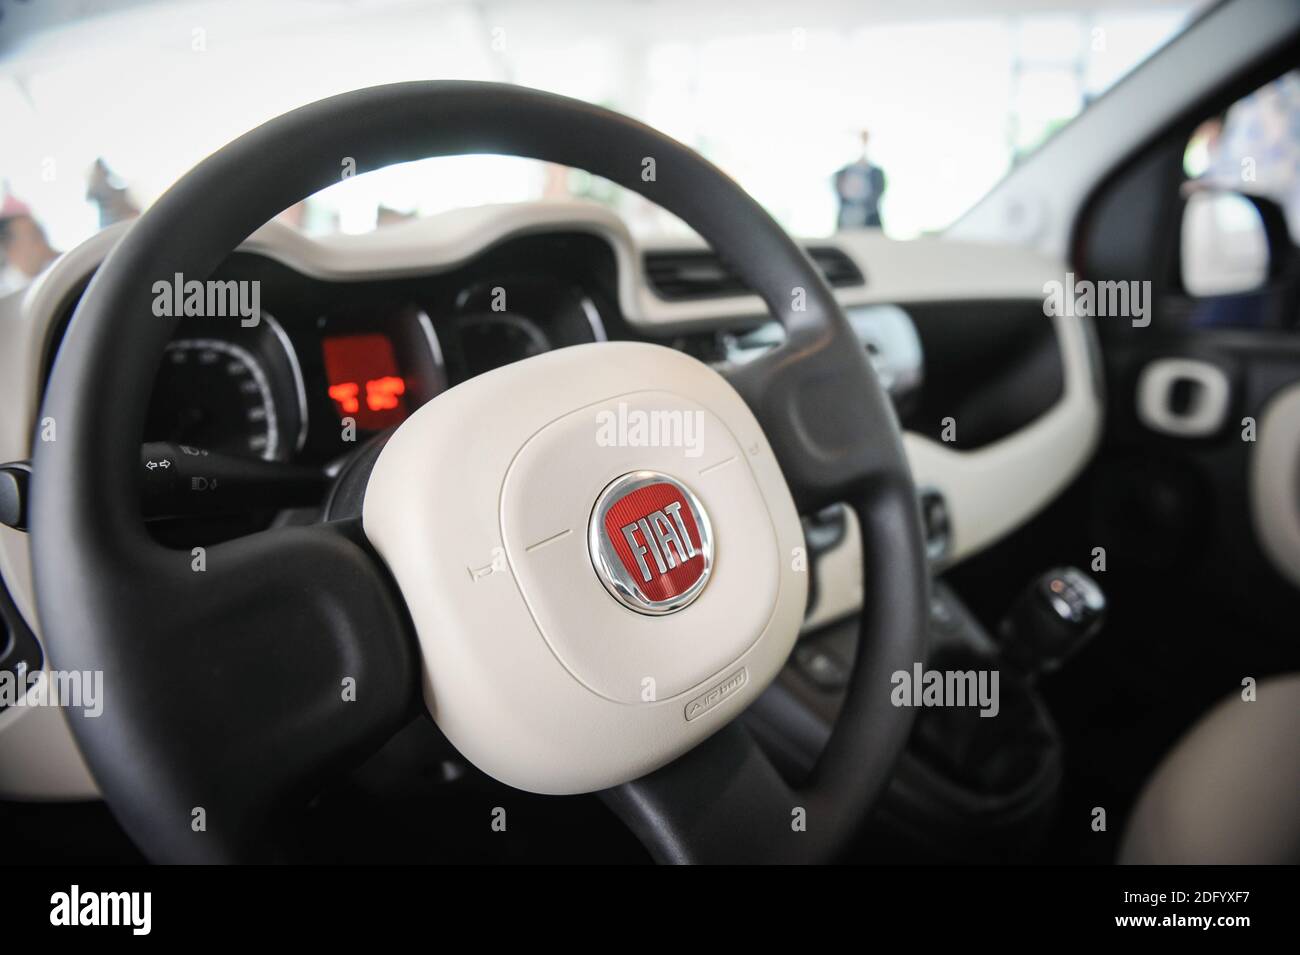 Bucharest, Romania - June 20, 2012: Details from inside a Fiat car with the steering wheel and the Fiat logo. Stock Photo